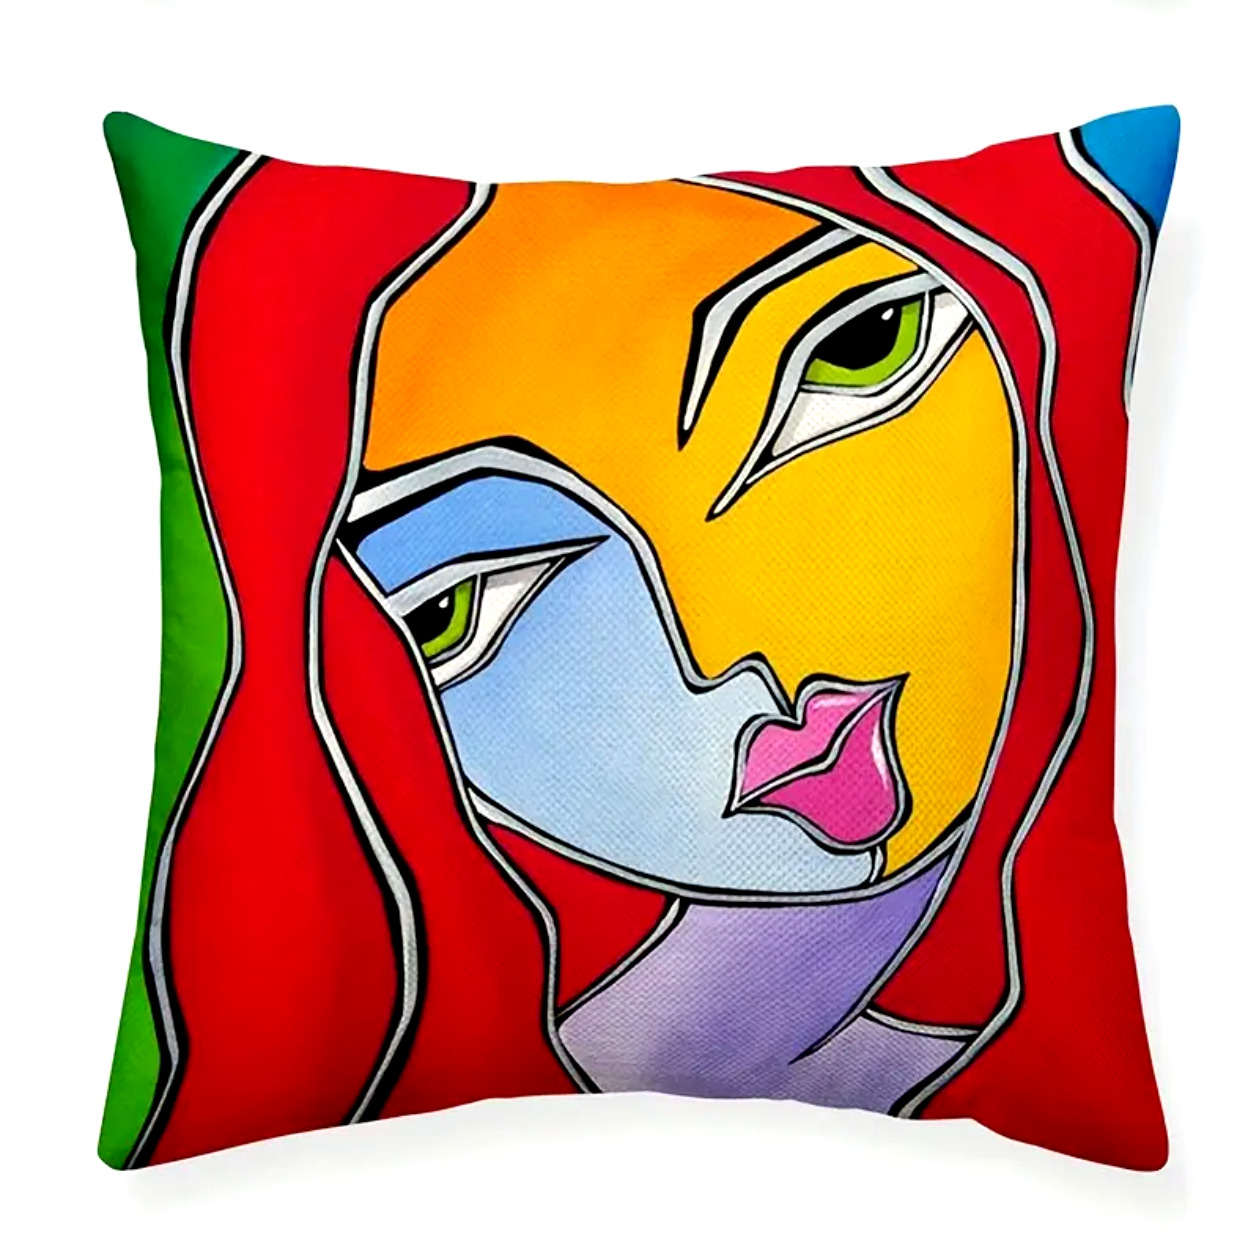 NEW Picasso Style Square Throw Pillow Cover Abstract Girl - Ships from Tulsa OK